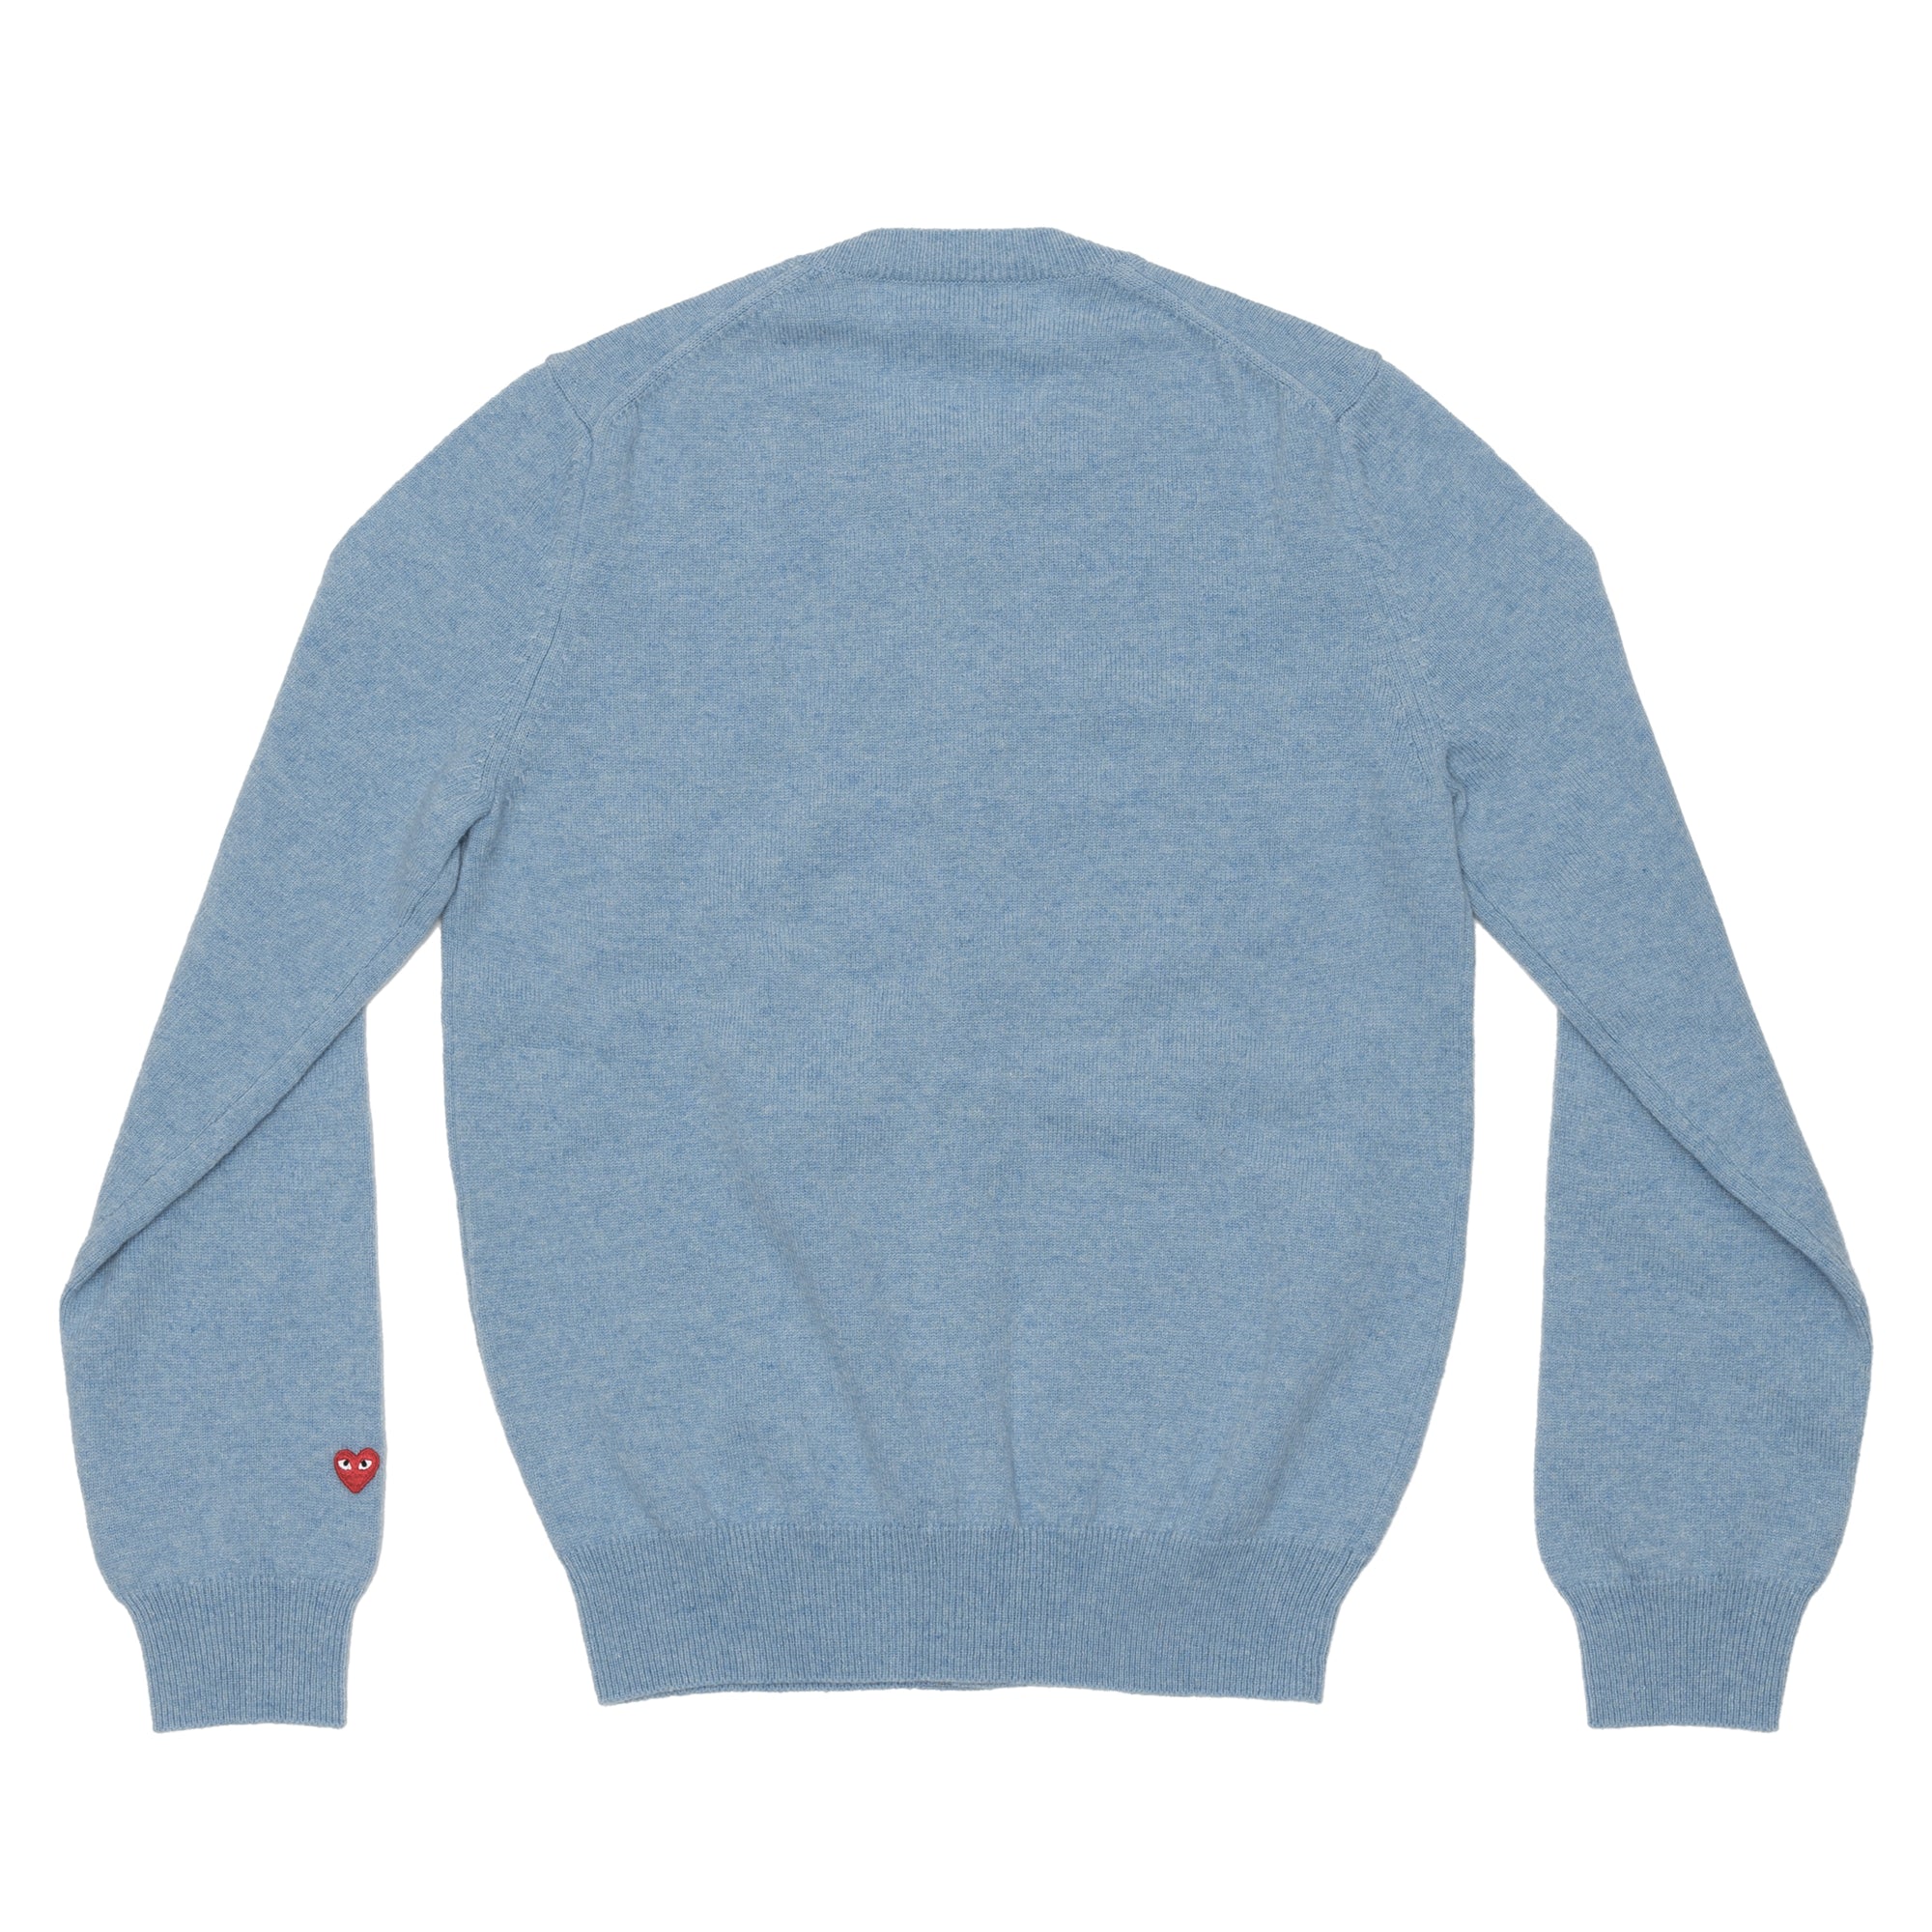 PLAY CDG  - Top Dyed Carded Lambswool Women's Cardigan - (Blue) view 2